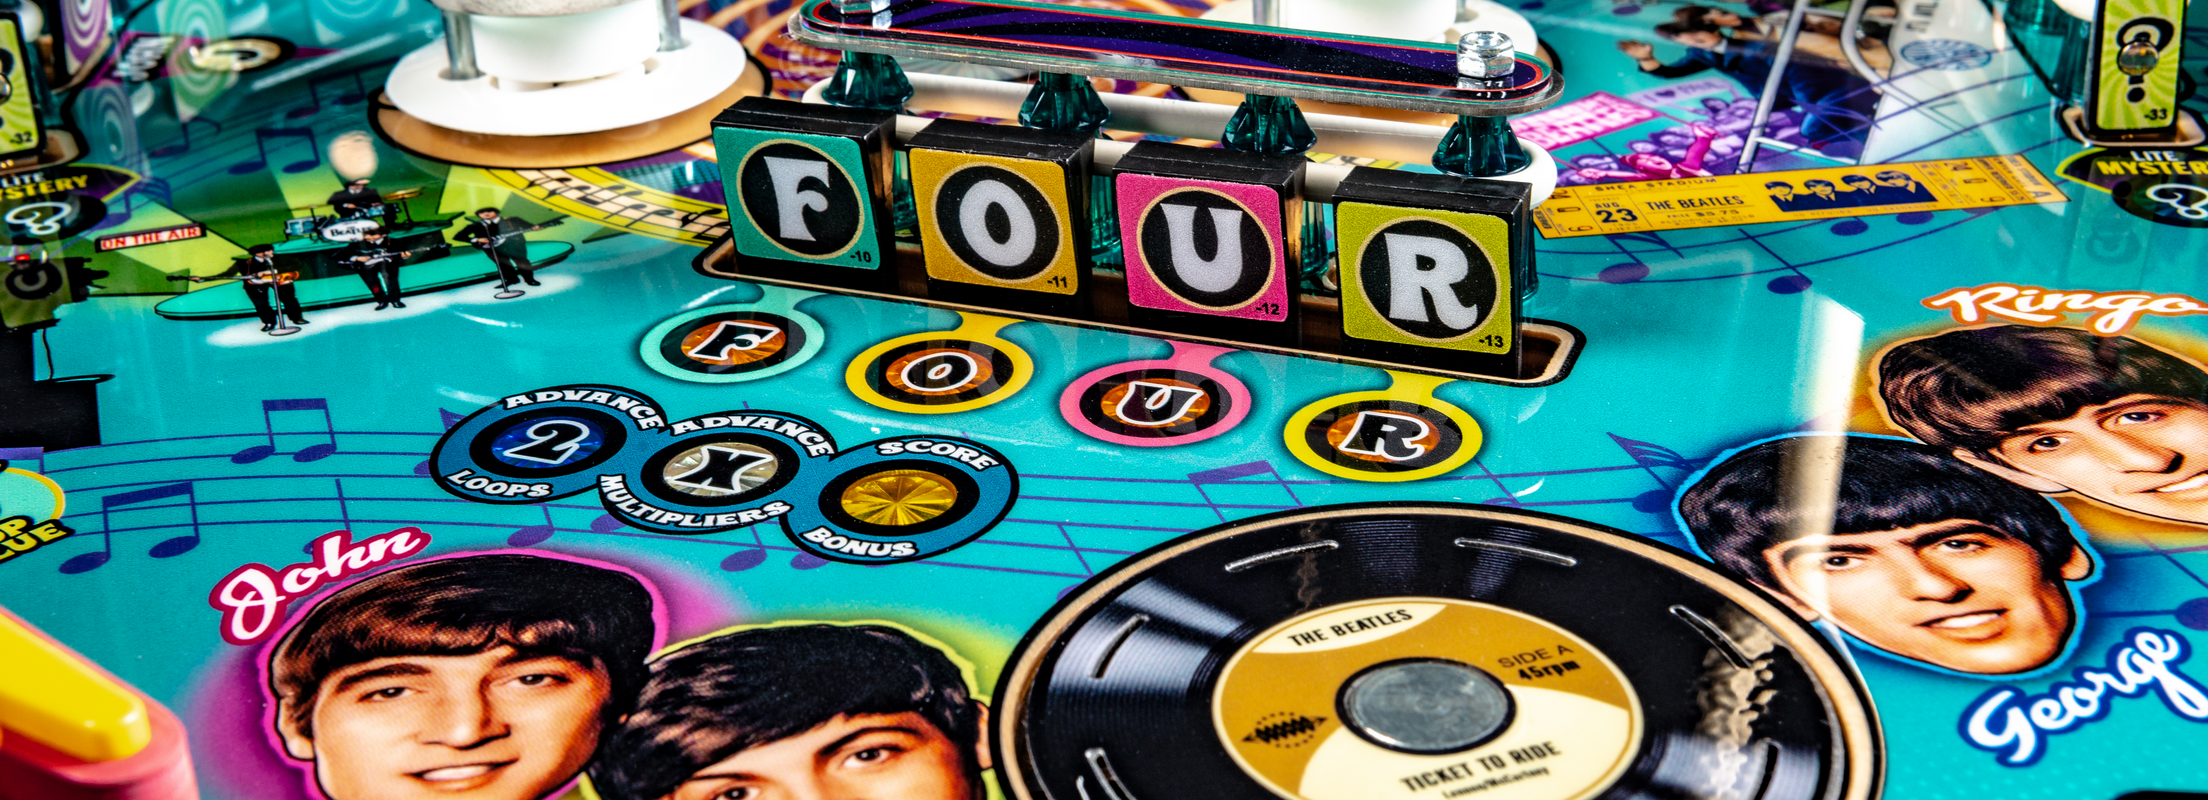 The Beatles and Stern Pinball Invade New York!